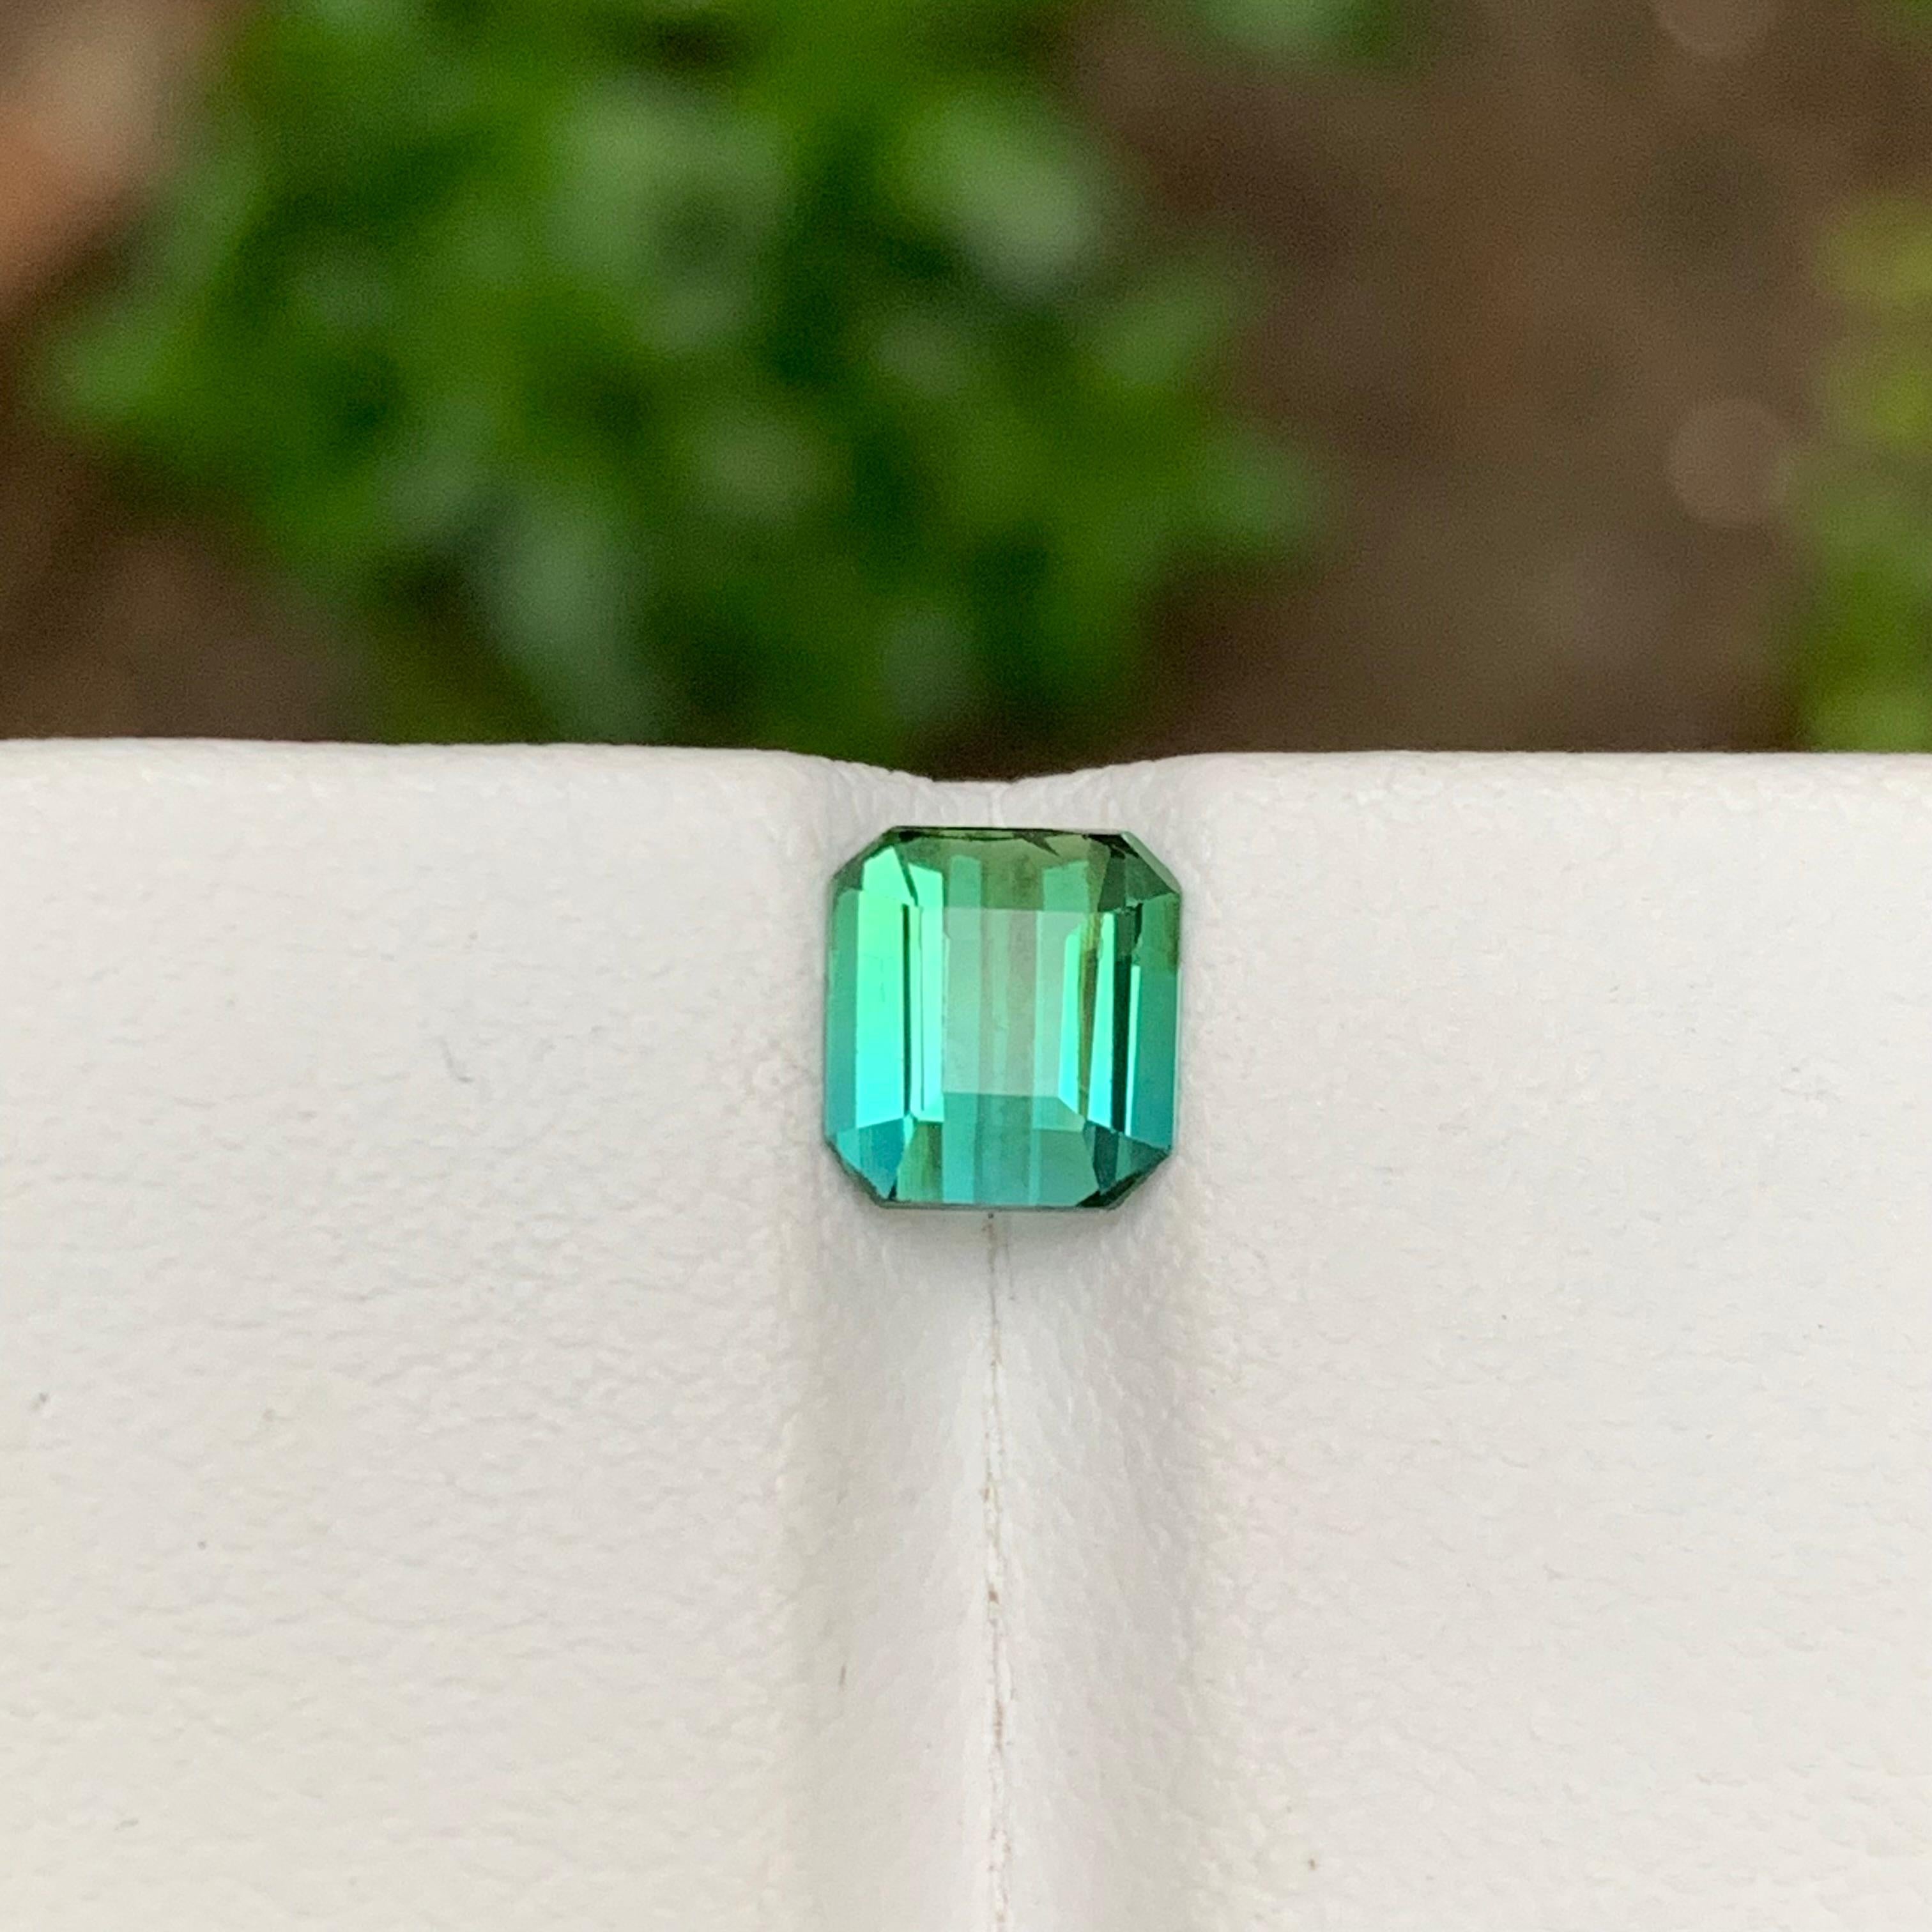 Contemporary Rare Light Blue & Green Two Tone Tourmaline Gemstone, 1.35 Ct Emerald Cut-Ring For Sale